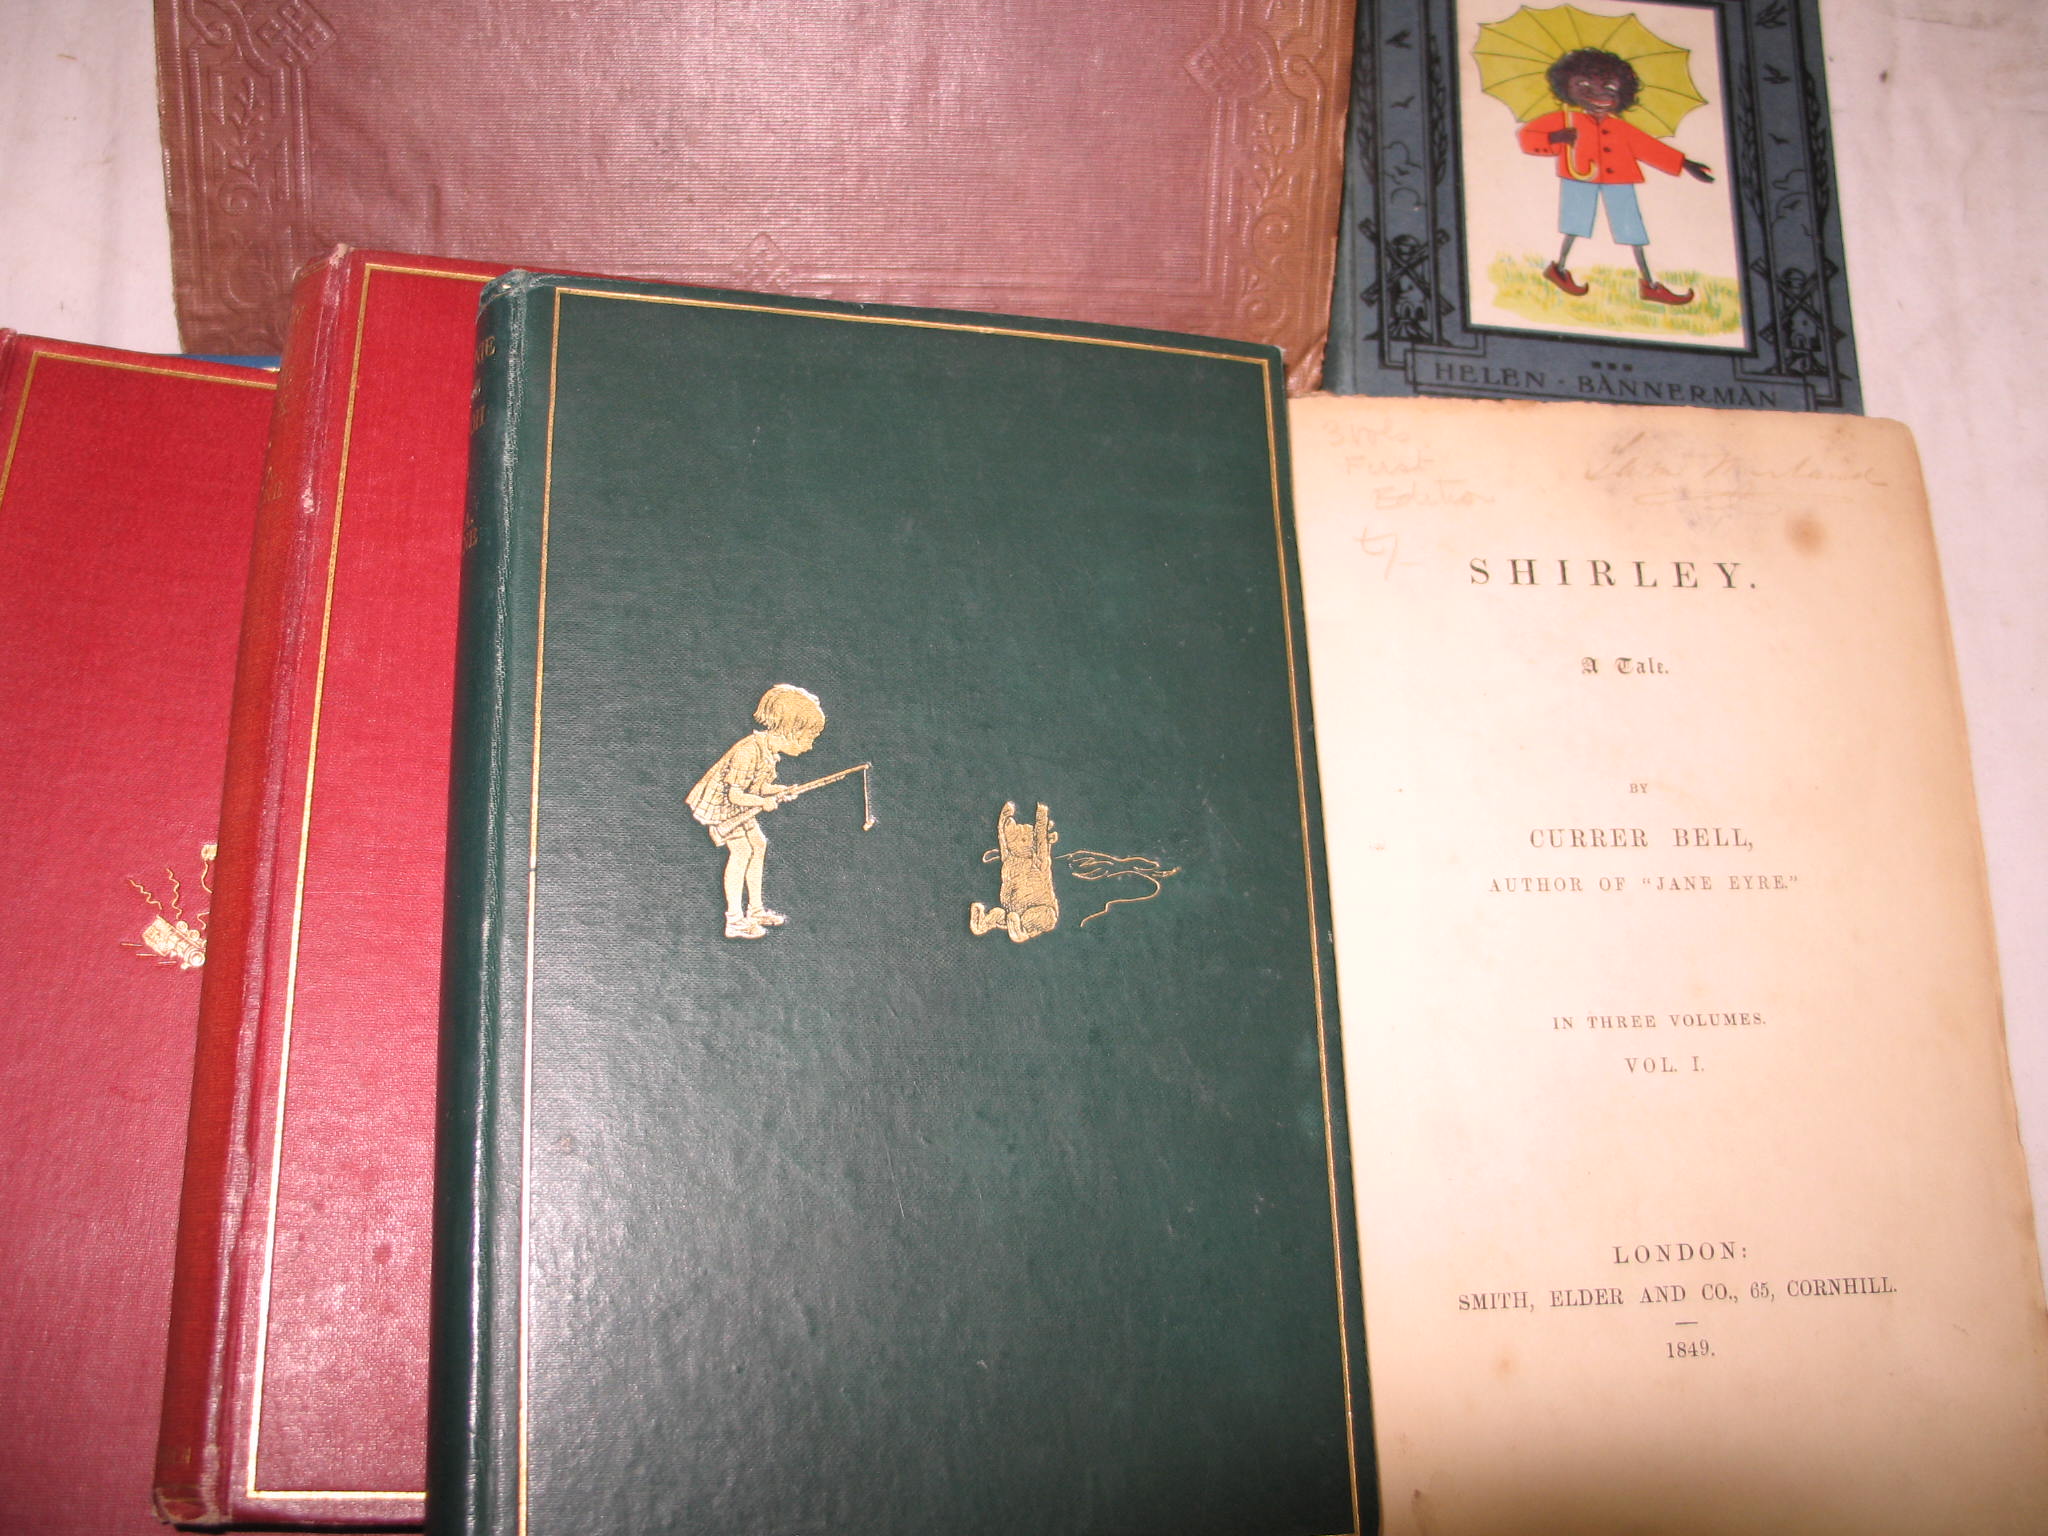 BRONTS (Charlotte) Shirley. A Tale, 3 vols., 8vo, lacking paste-downs & half titles, owner name &